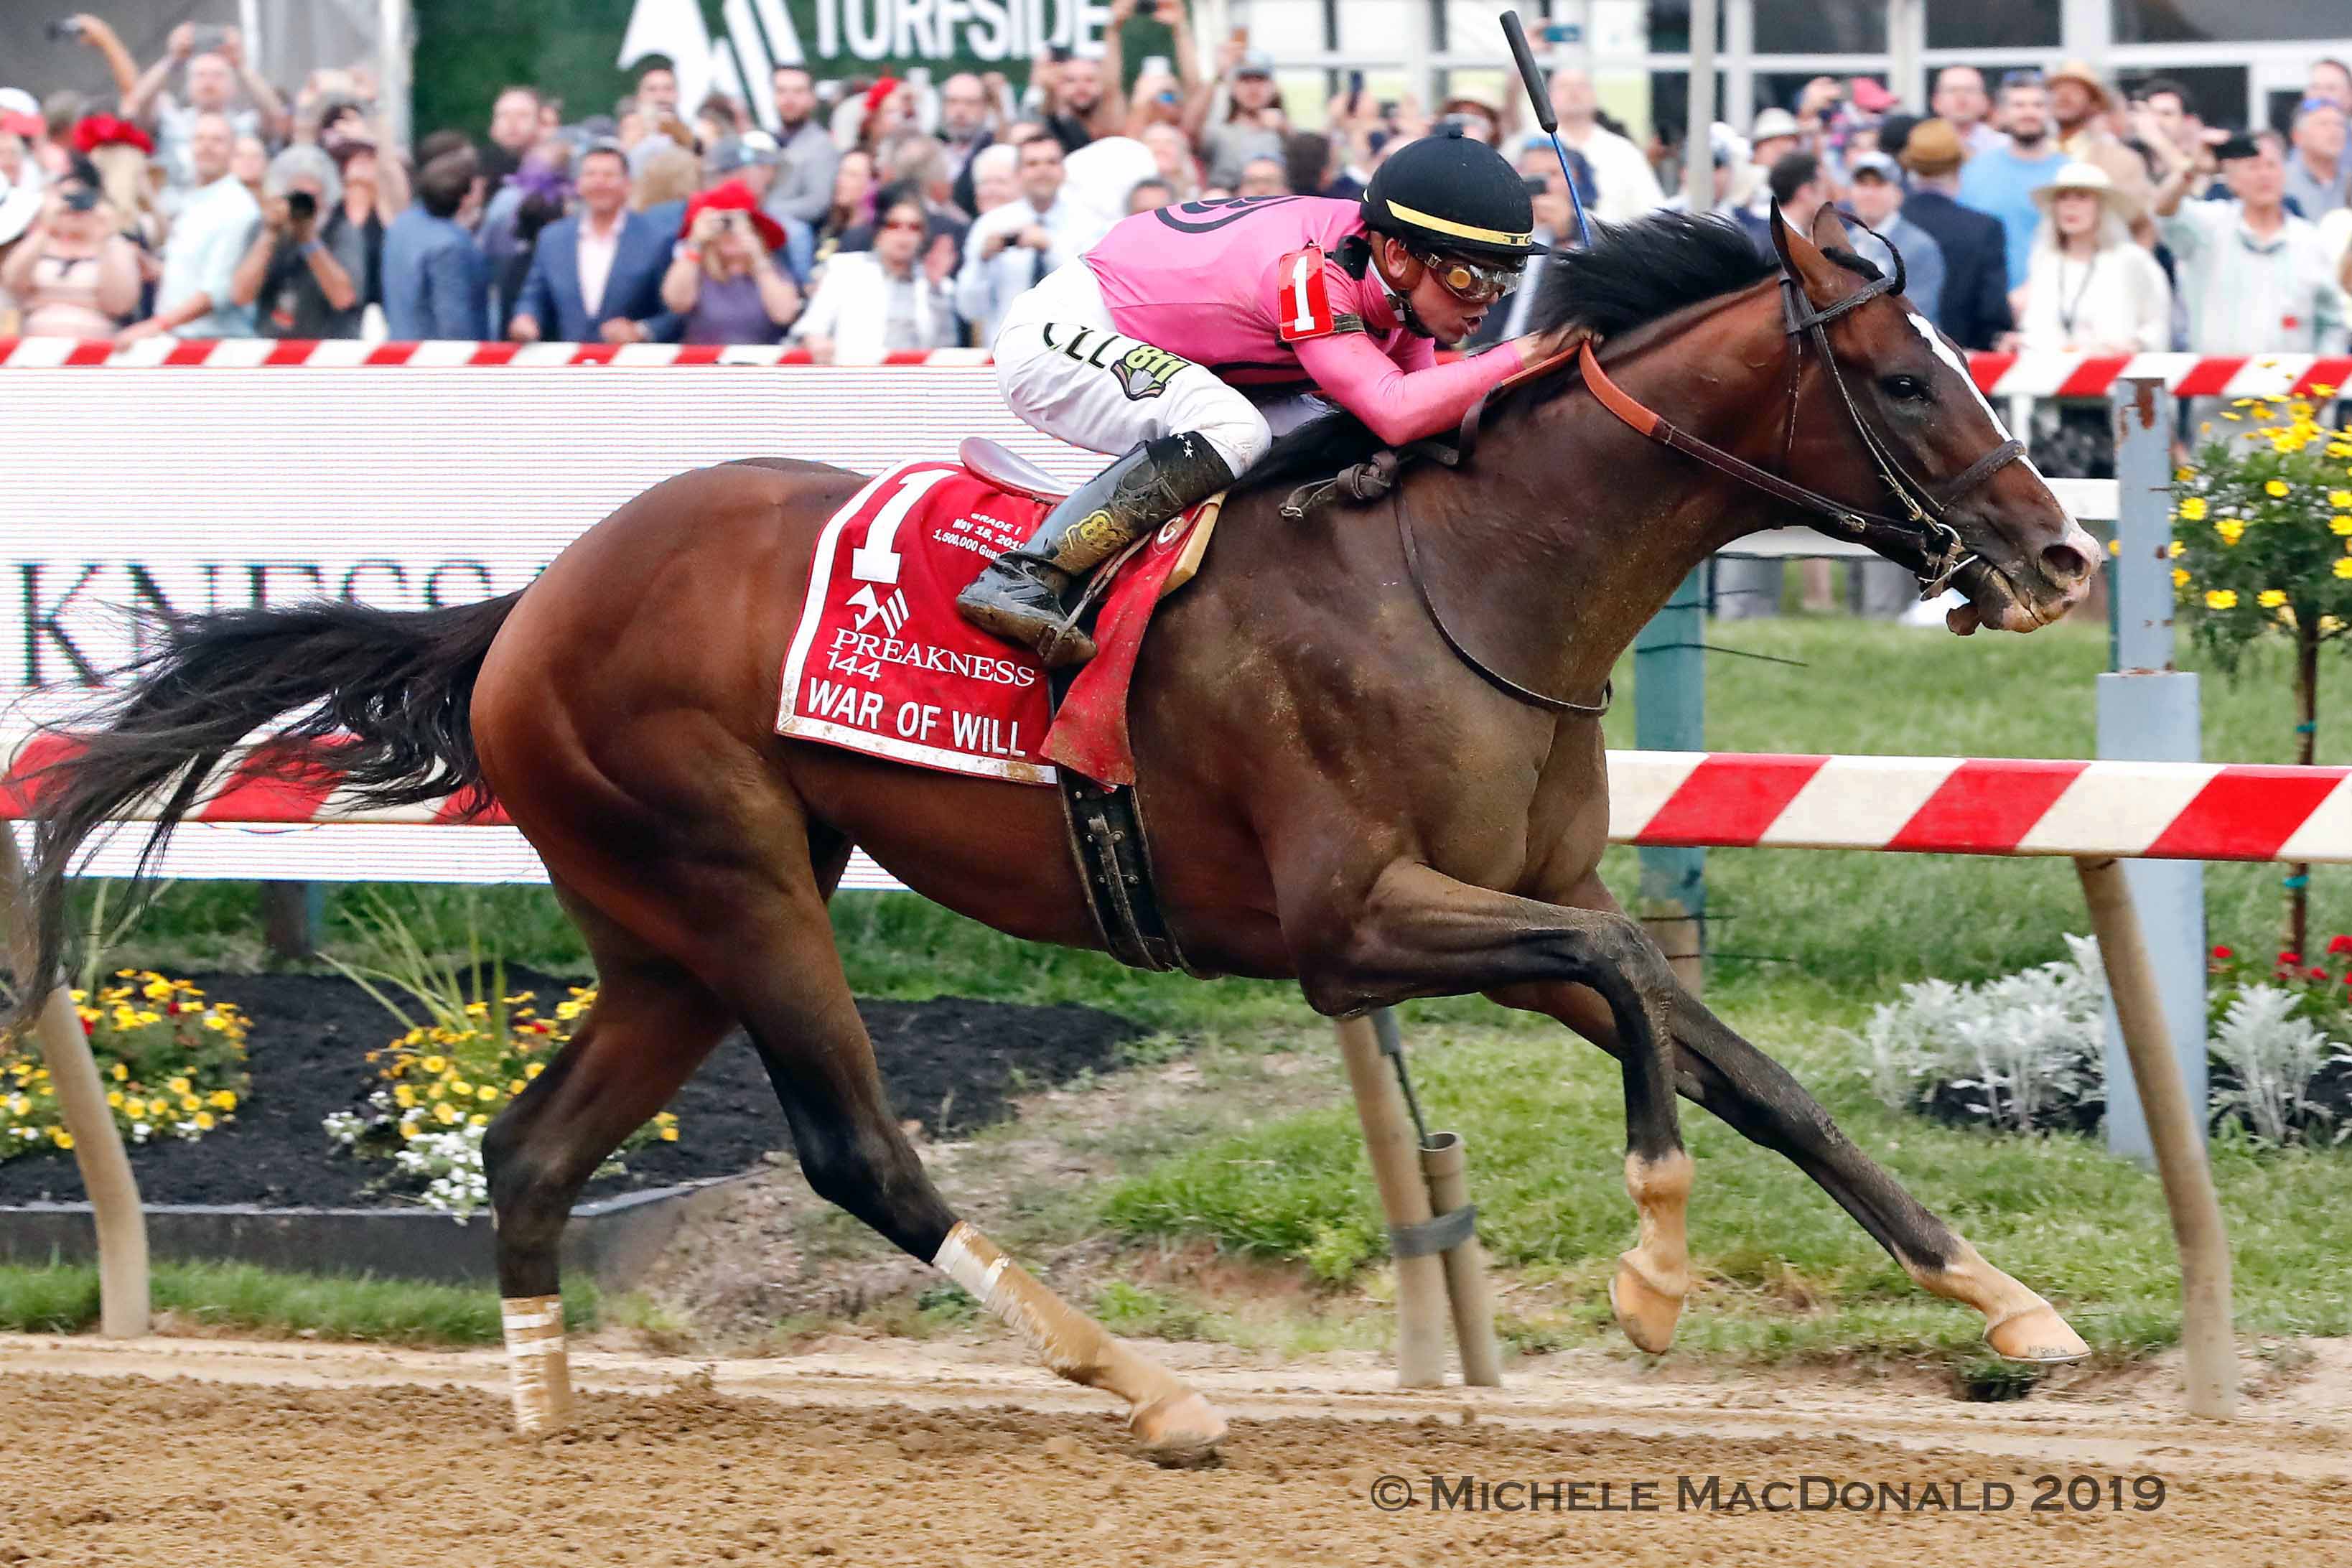 War Of Will, who became War Front’s first dirt classic winner when he took the Preakness last month, goes for more glory in Saturday’s Belmont Stakes. Photo: Michele MacDonald